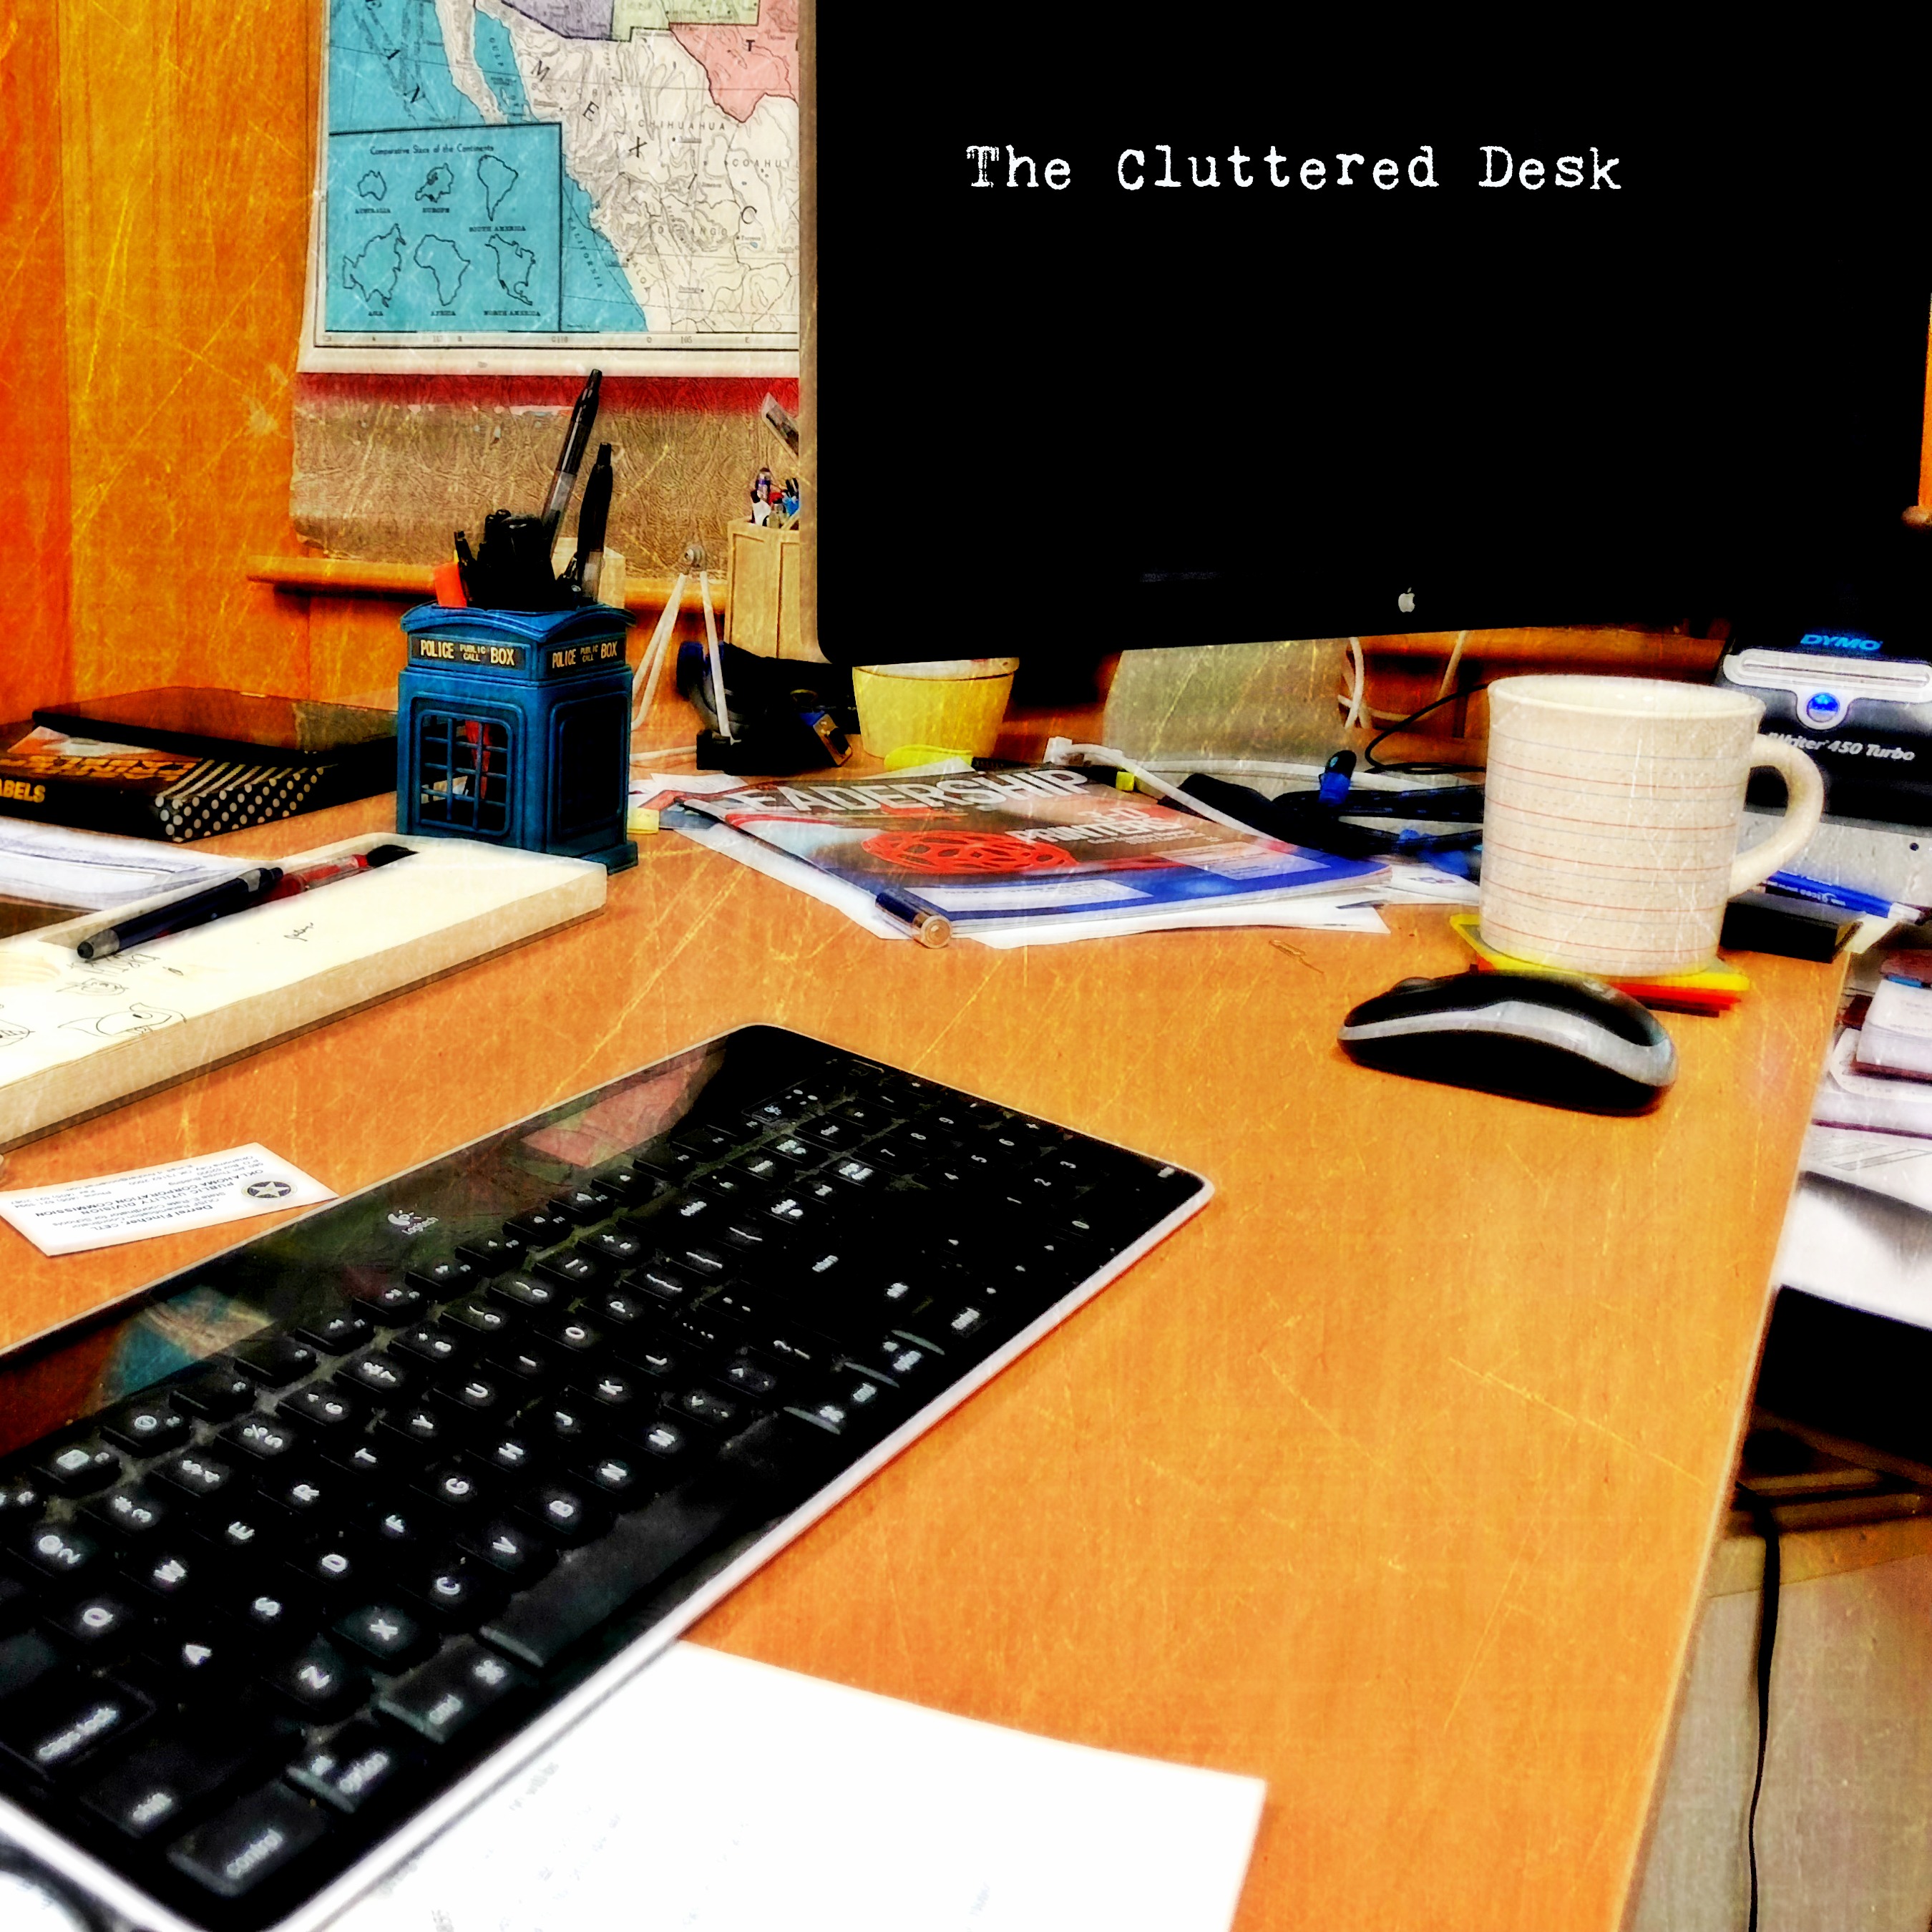 The Cluttered Desk